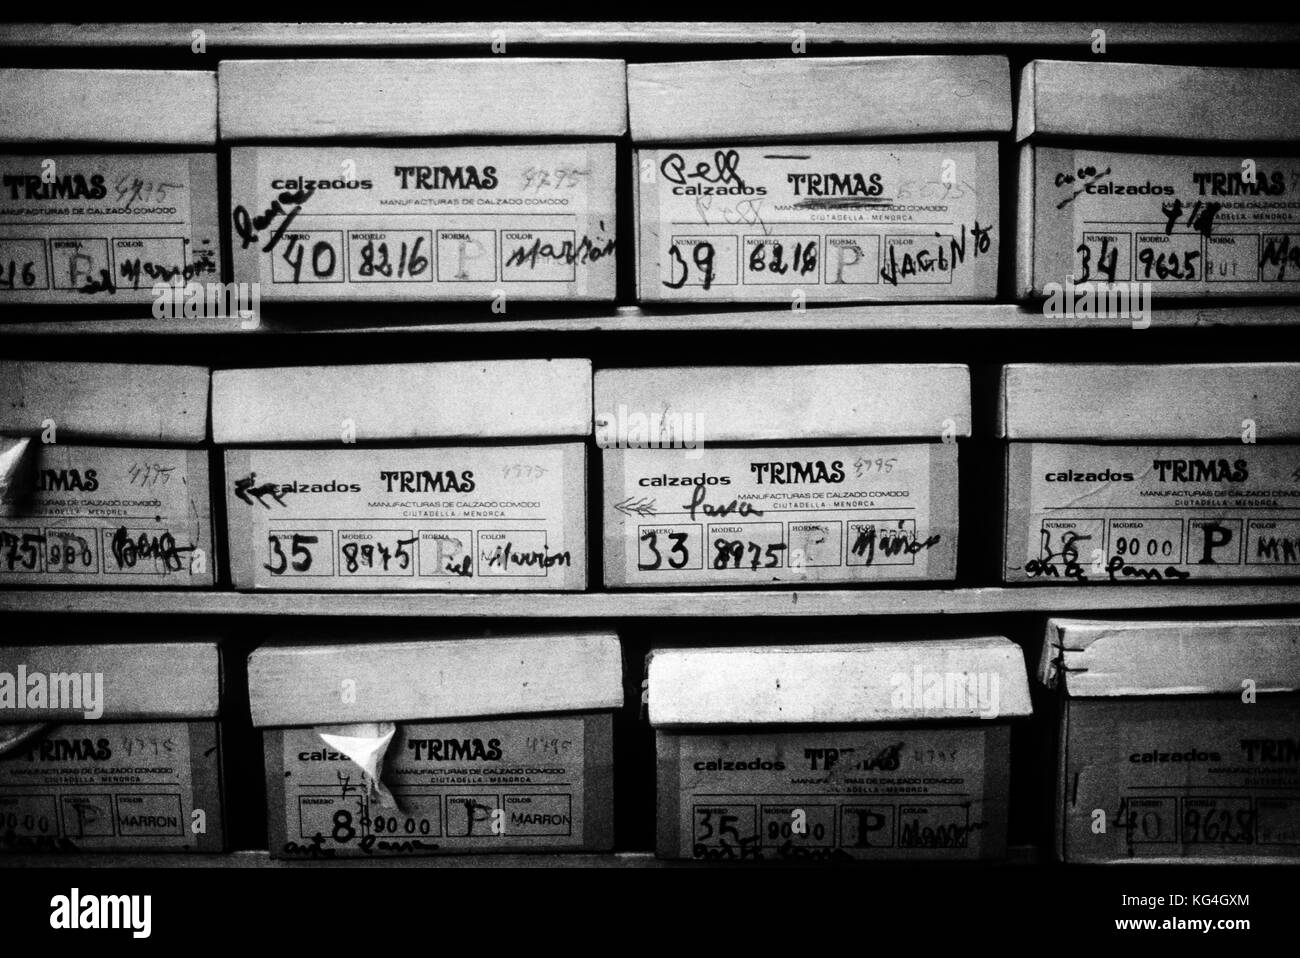 Shoe boxes stand on the shelves from the extinct shoe shop Calçats Mila in the Carme street of Barcelona, Spain. Date: 02/2003. Photo: Xabier Mikel Laburu. The shoe shop Calçats Mila is documented with an other name in 1846. In the beginnings of the XX century, the shop is sold to the Mila family who would take care of it until the death of Roser, the last owner after her brother Joan who would have the tough job to close the shop in 2003. Stock Photo